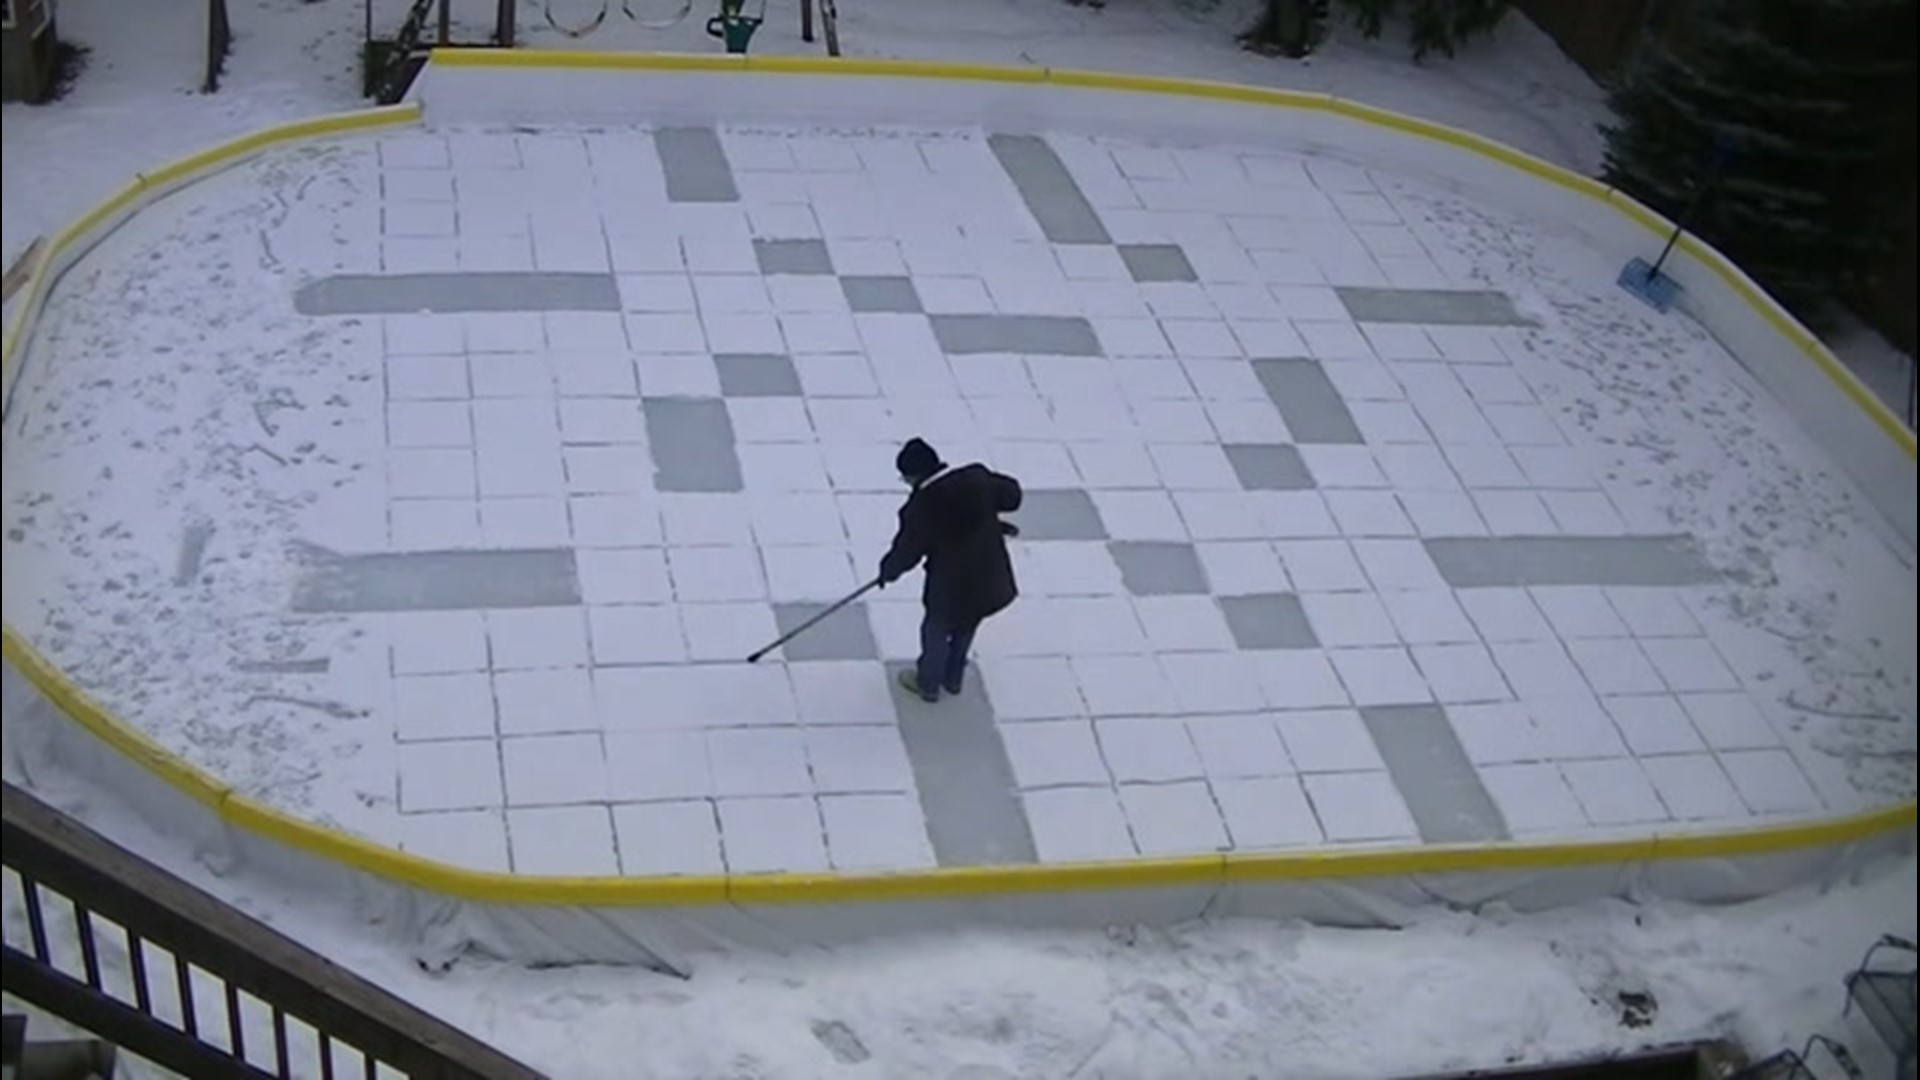 Bob Greenfield first shoveled snow into a design to tell his wife 'I love you.' Since then, he's become a sensation, with versions of the Mona Lisa, cartoon characters, and now, a giant crossword.